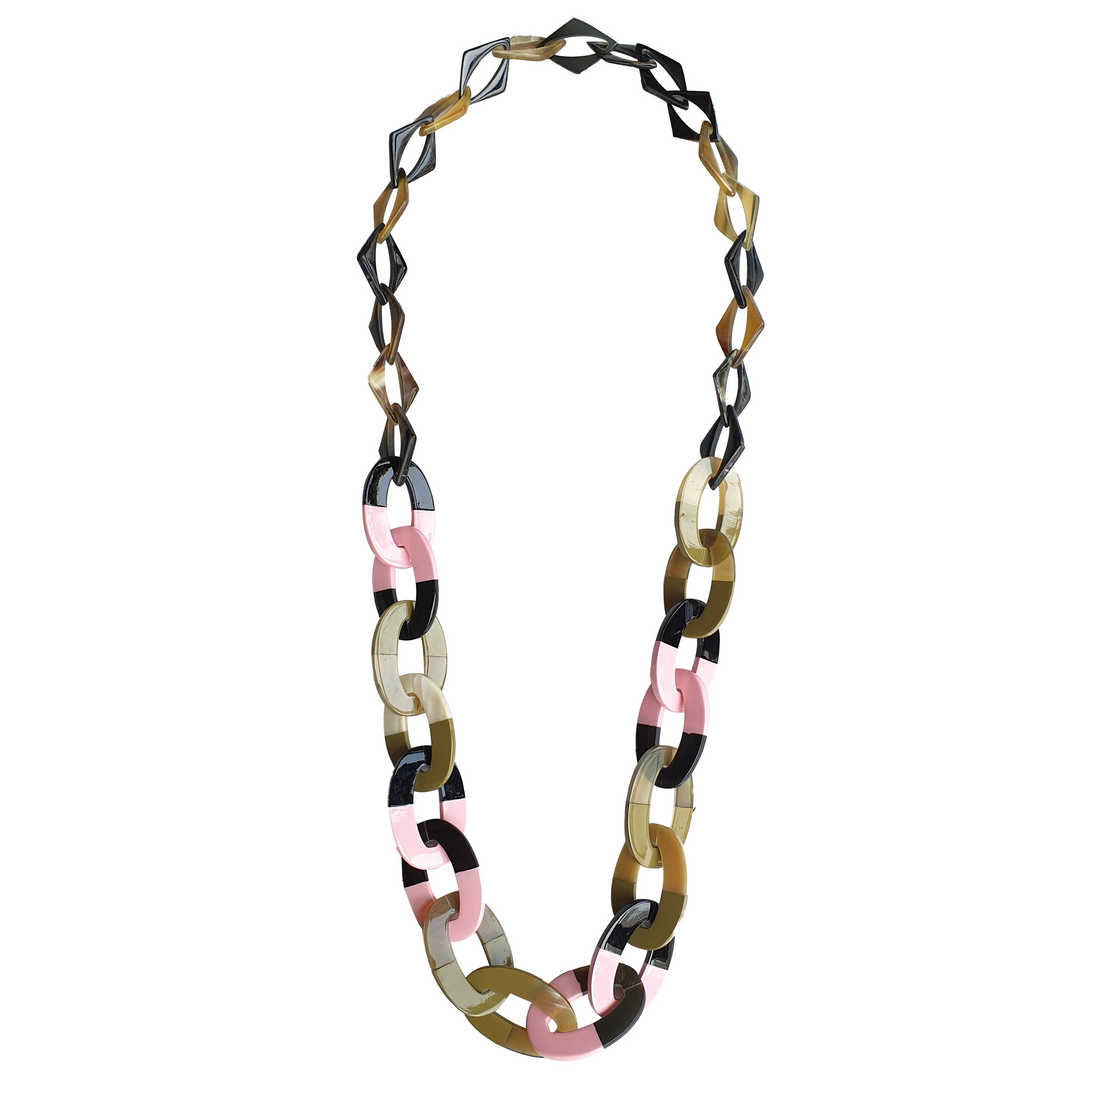 Jasmino unique handmade Bohemian Vintage chain necklace features black and pink in natural buffalo horn for women's gifts